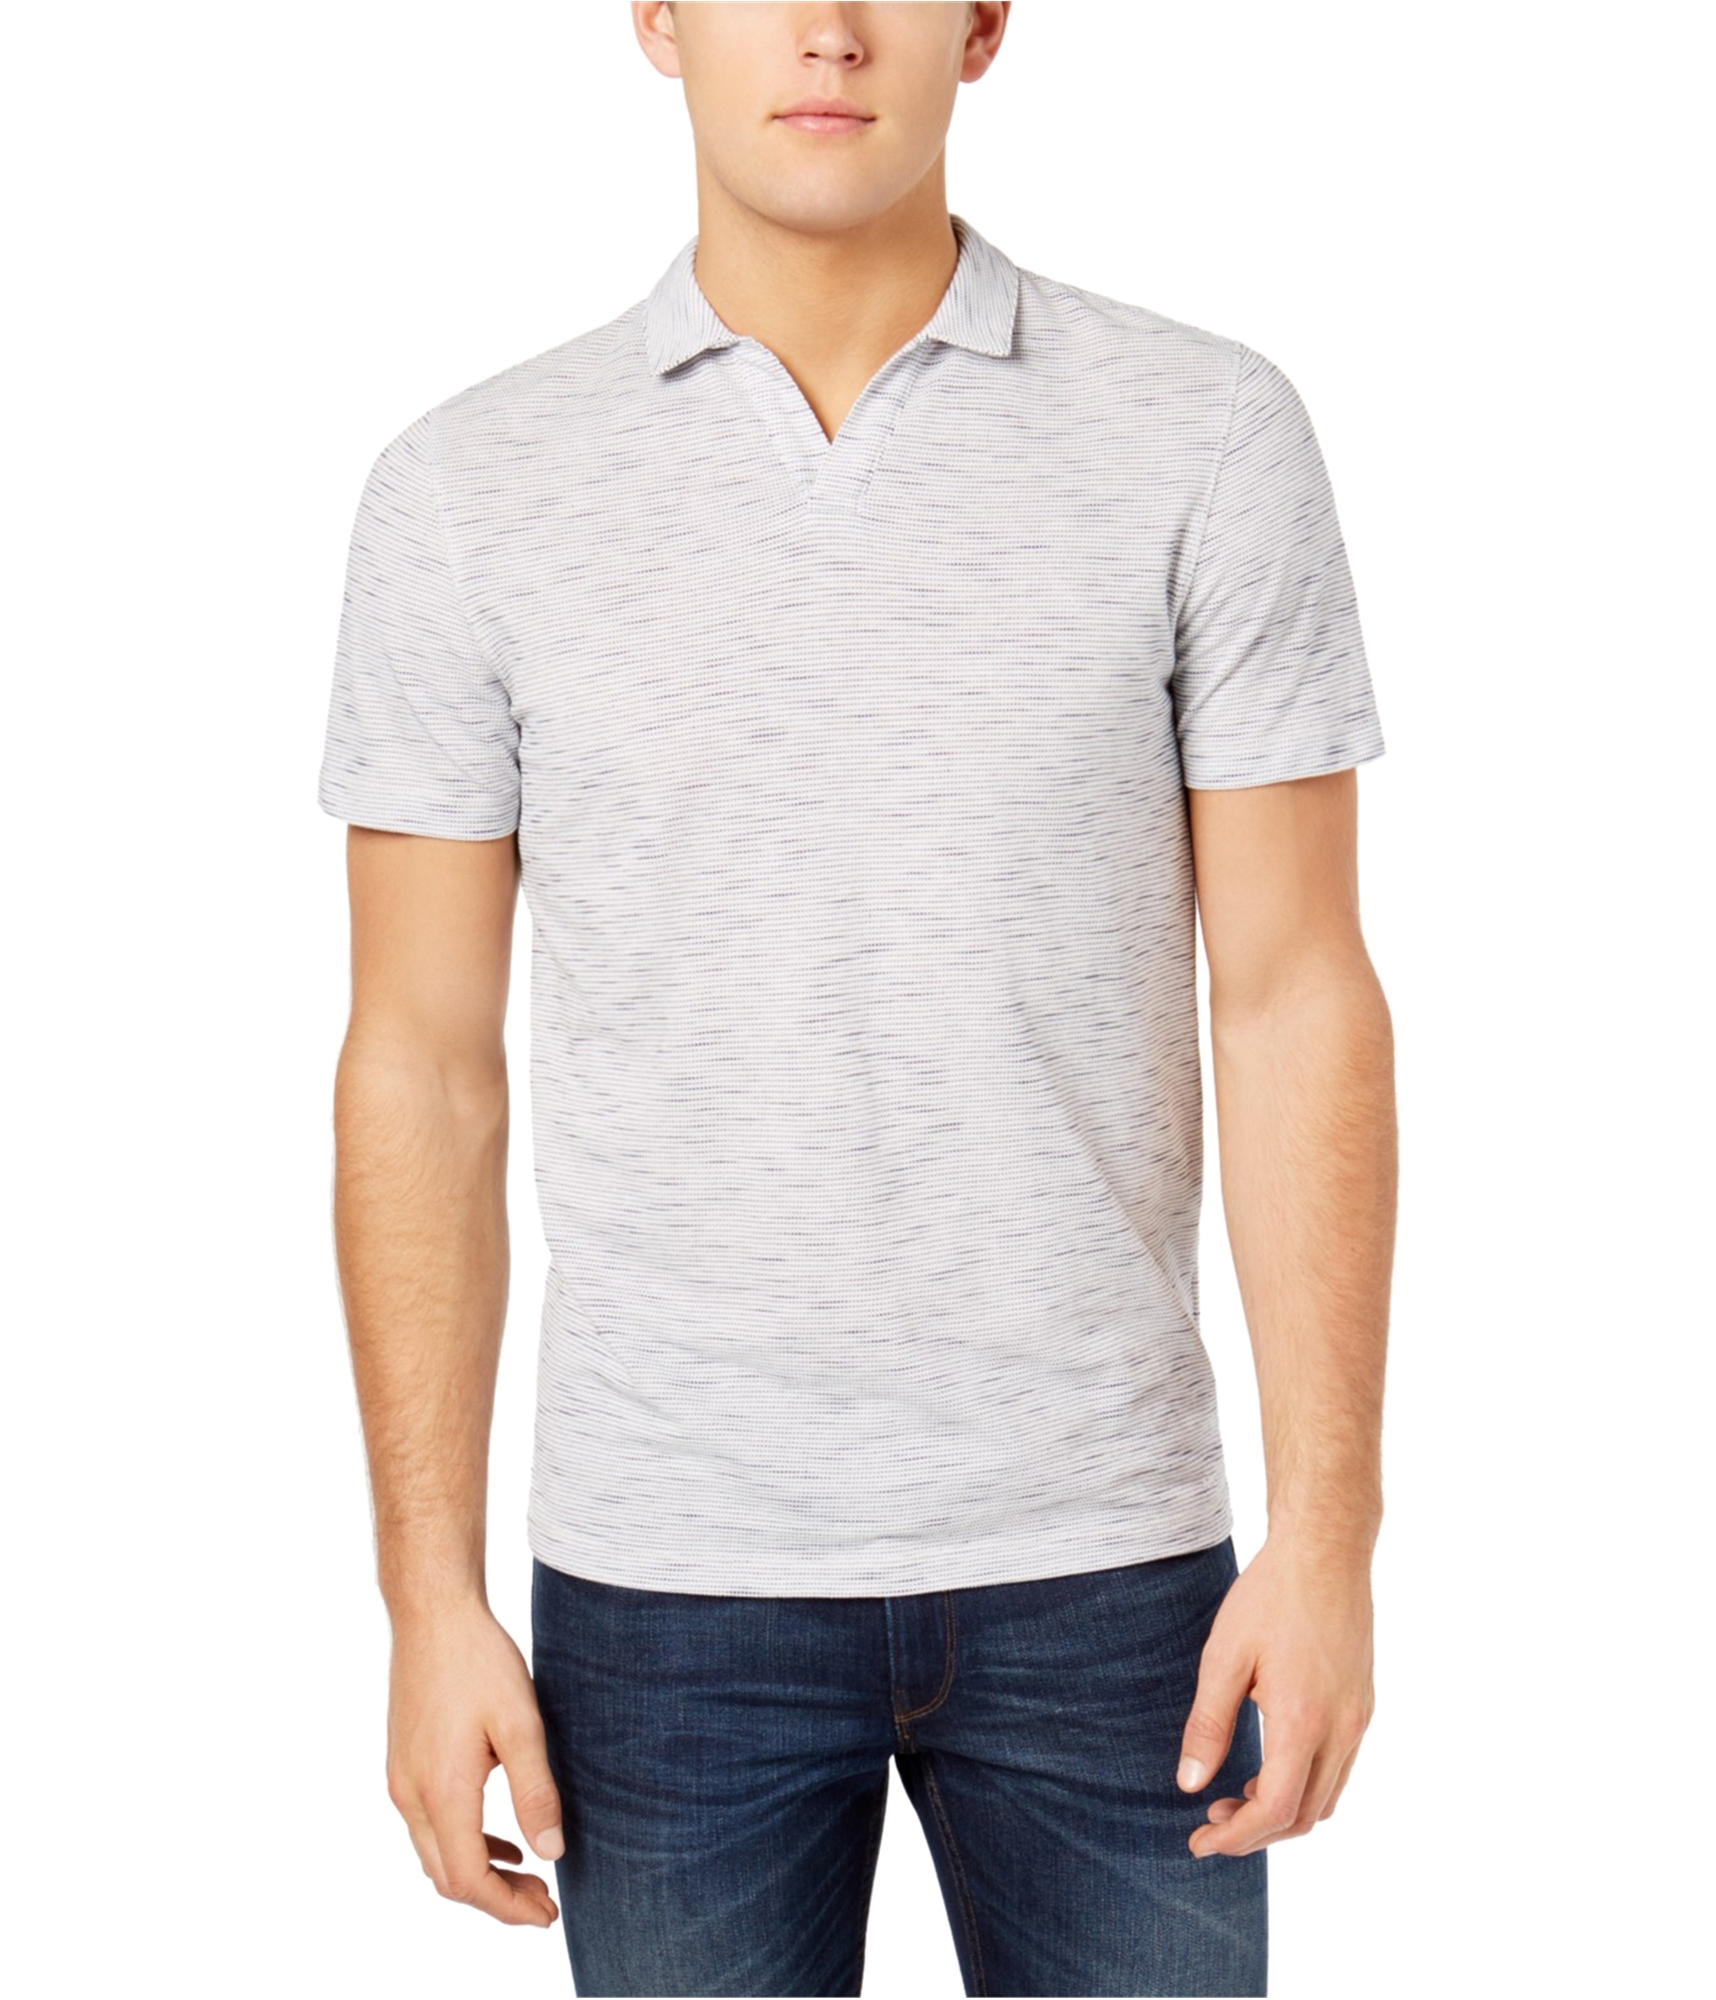 Buy a Mens Michael Kors Johnny Rugby Polo Shirt Online | TagsWeekly.com